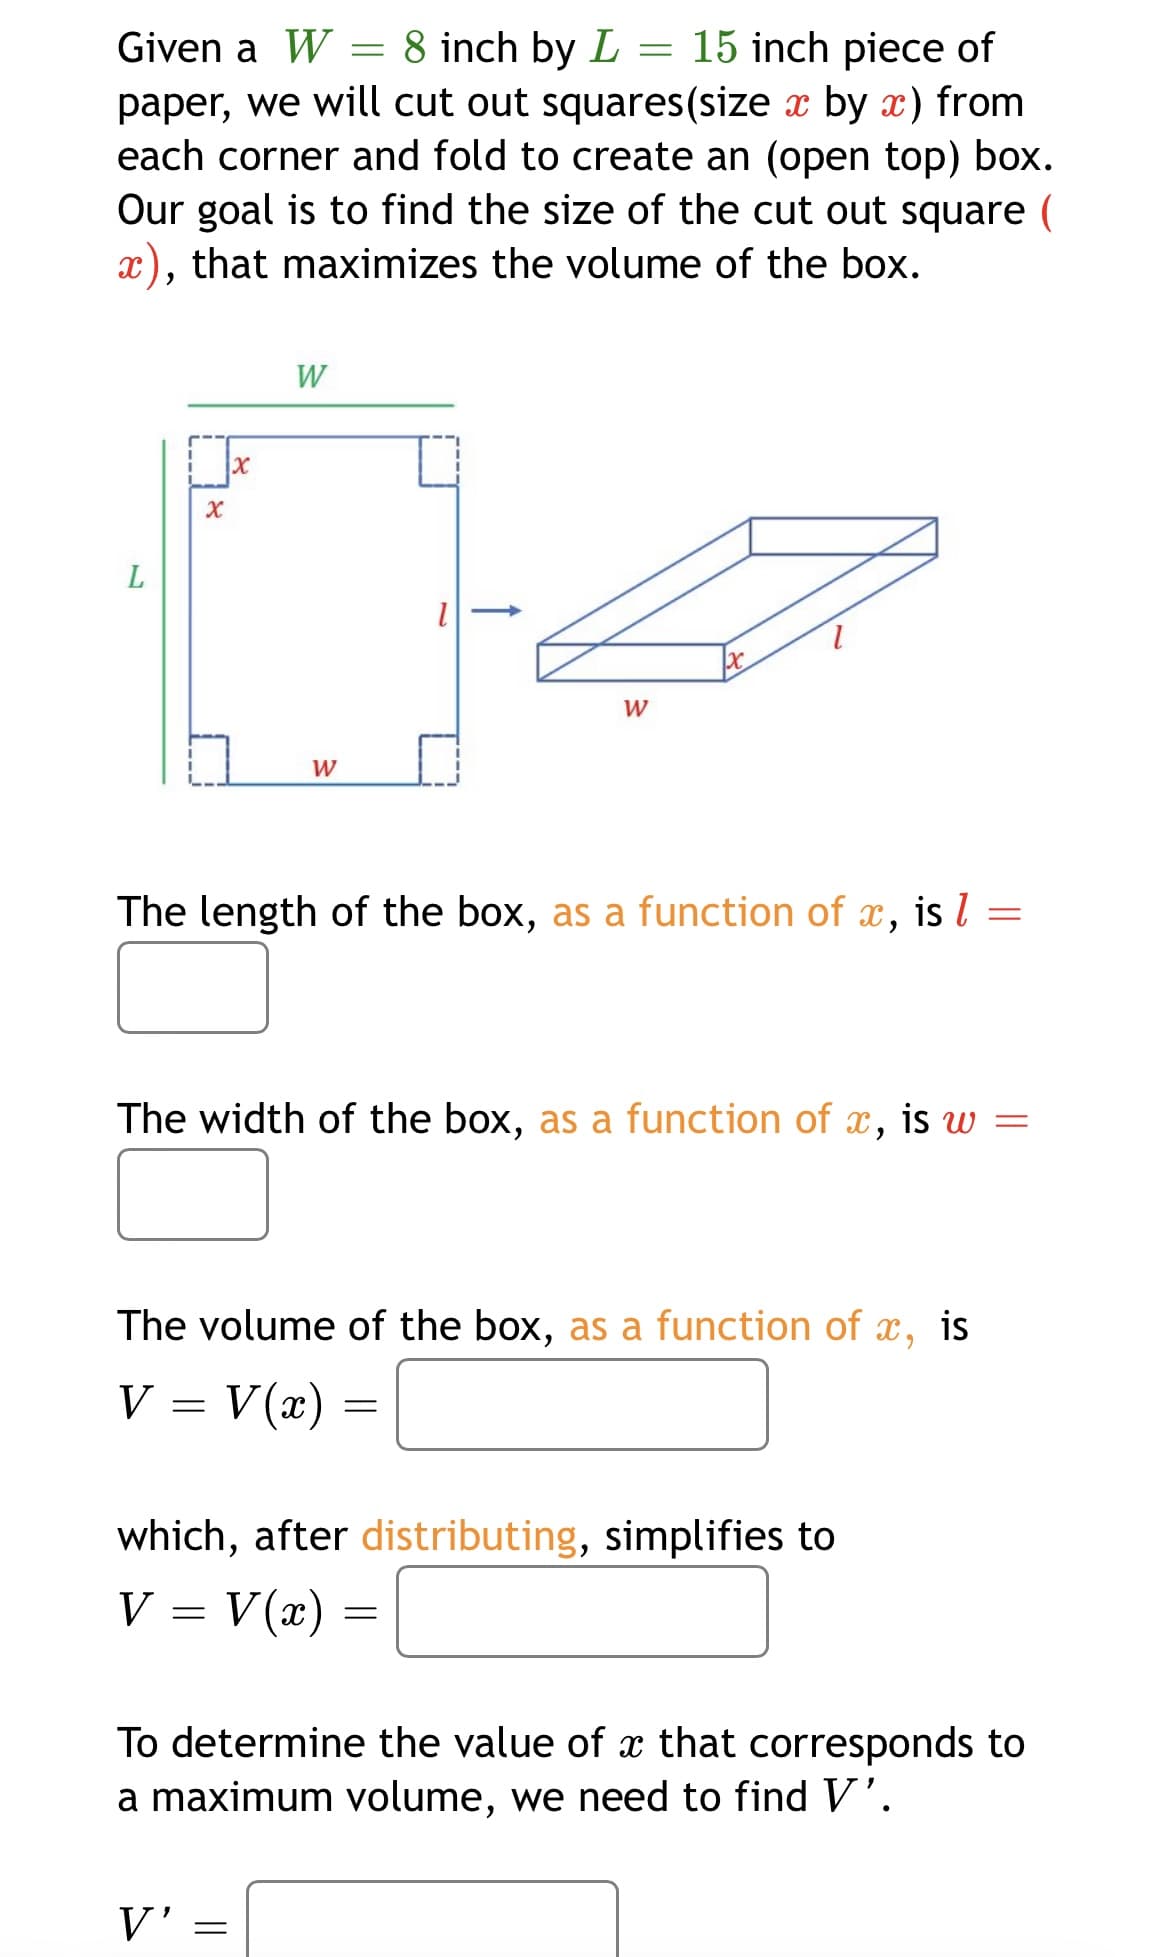 Given a W = 8 inch by L = 15 inch piece of
paper, we will cut out squares(size x by x) from
each corner and fold to create an (open top) box.
Our goal is to find the size of the cut out square (
x), that maximizes the volume of the box.
W
W
W
The length of the box, as a function of x, is l
The width of the box, as a function of x,
is w =
The volume of the box, as a function of x, is
V
= V(x) =
which, after distributing, simplifies to
V = V(x) =
To determine the value of x that corresponds to
a maximum volume, we need to find V'.
V'
